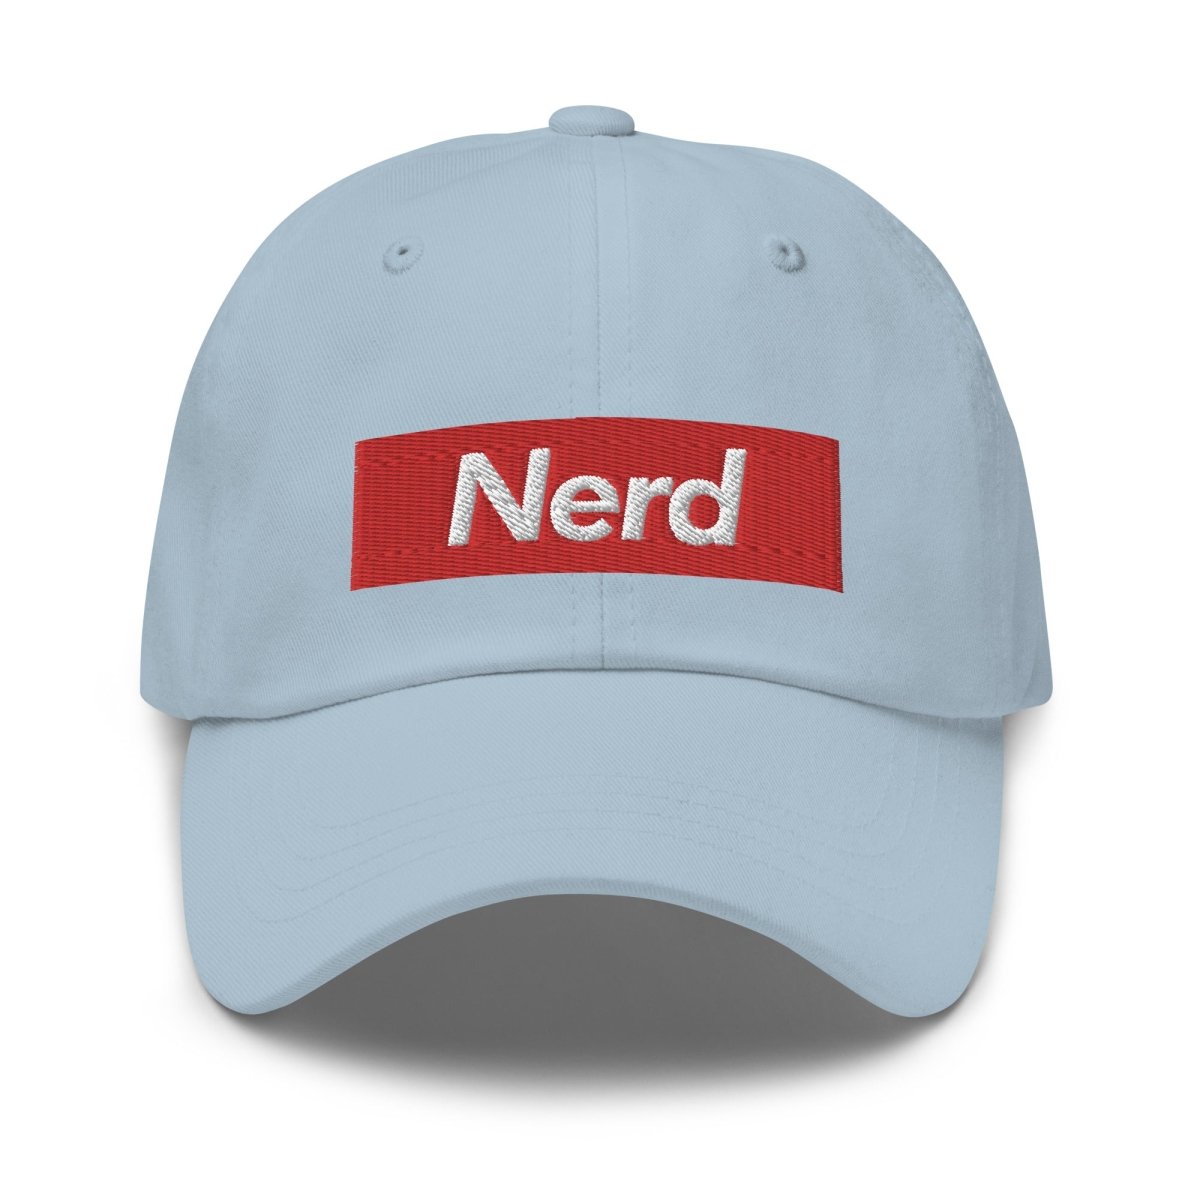 Nerd Sign Embroidered Cap - Light Blue - AI Store